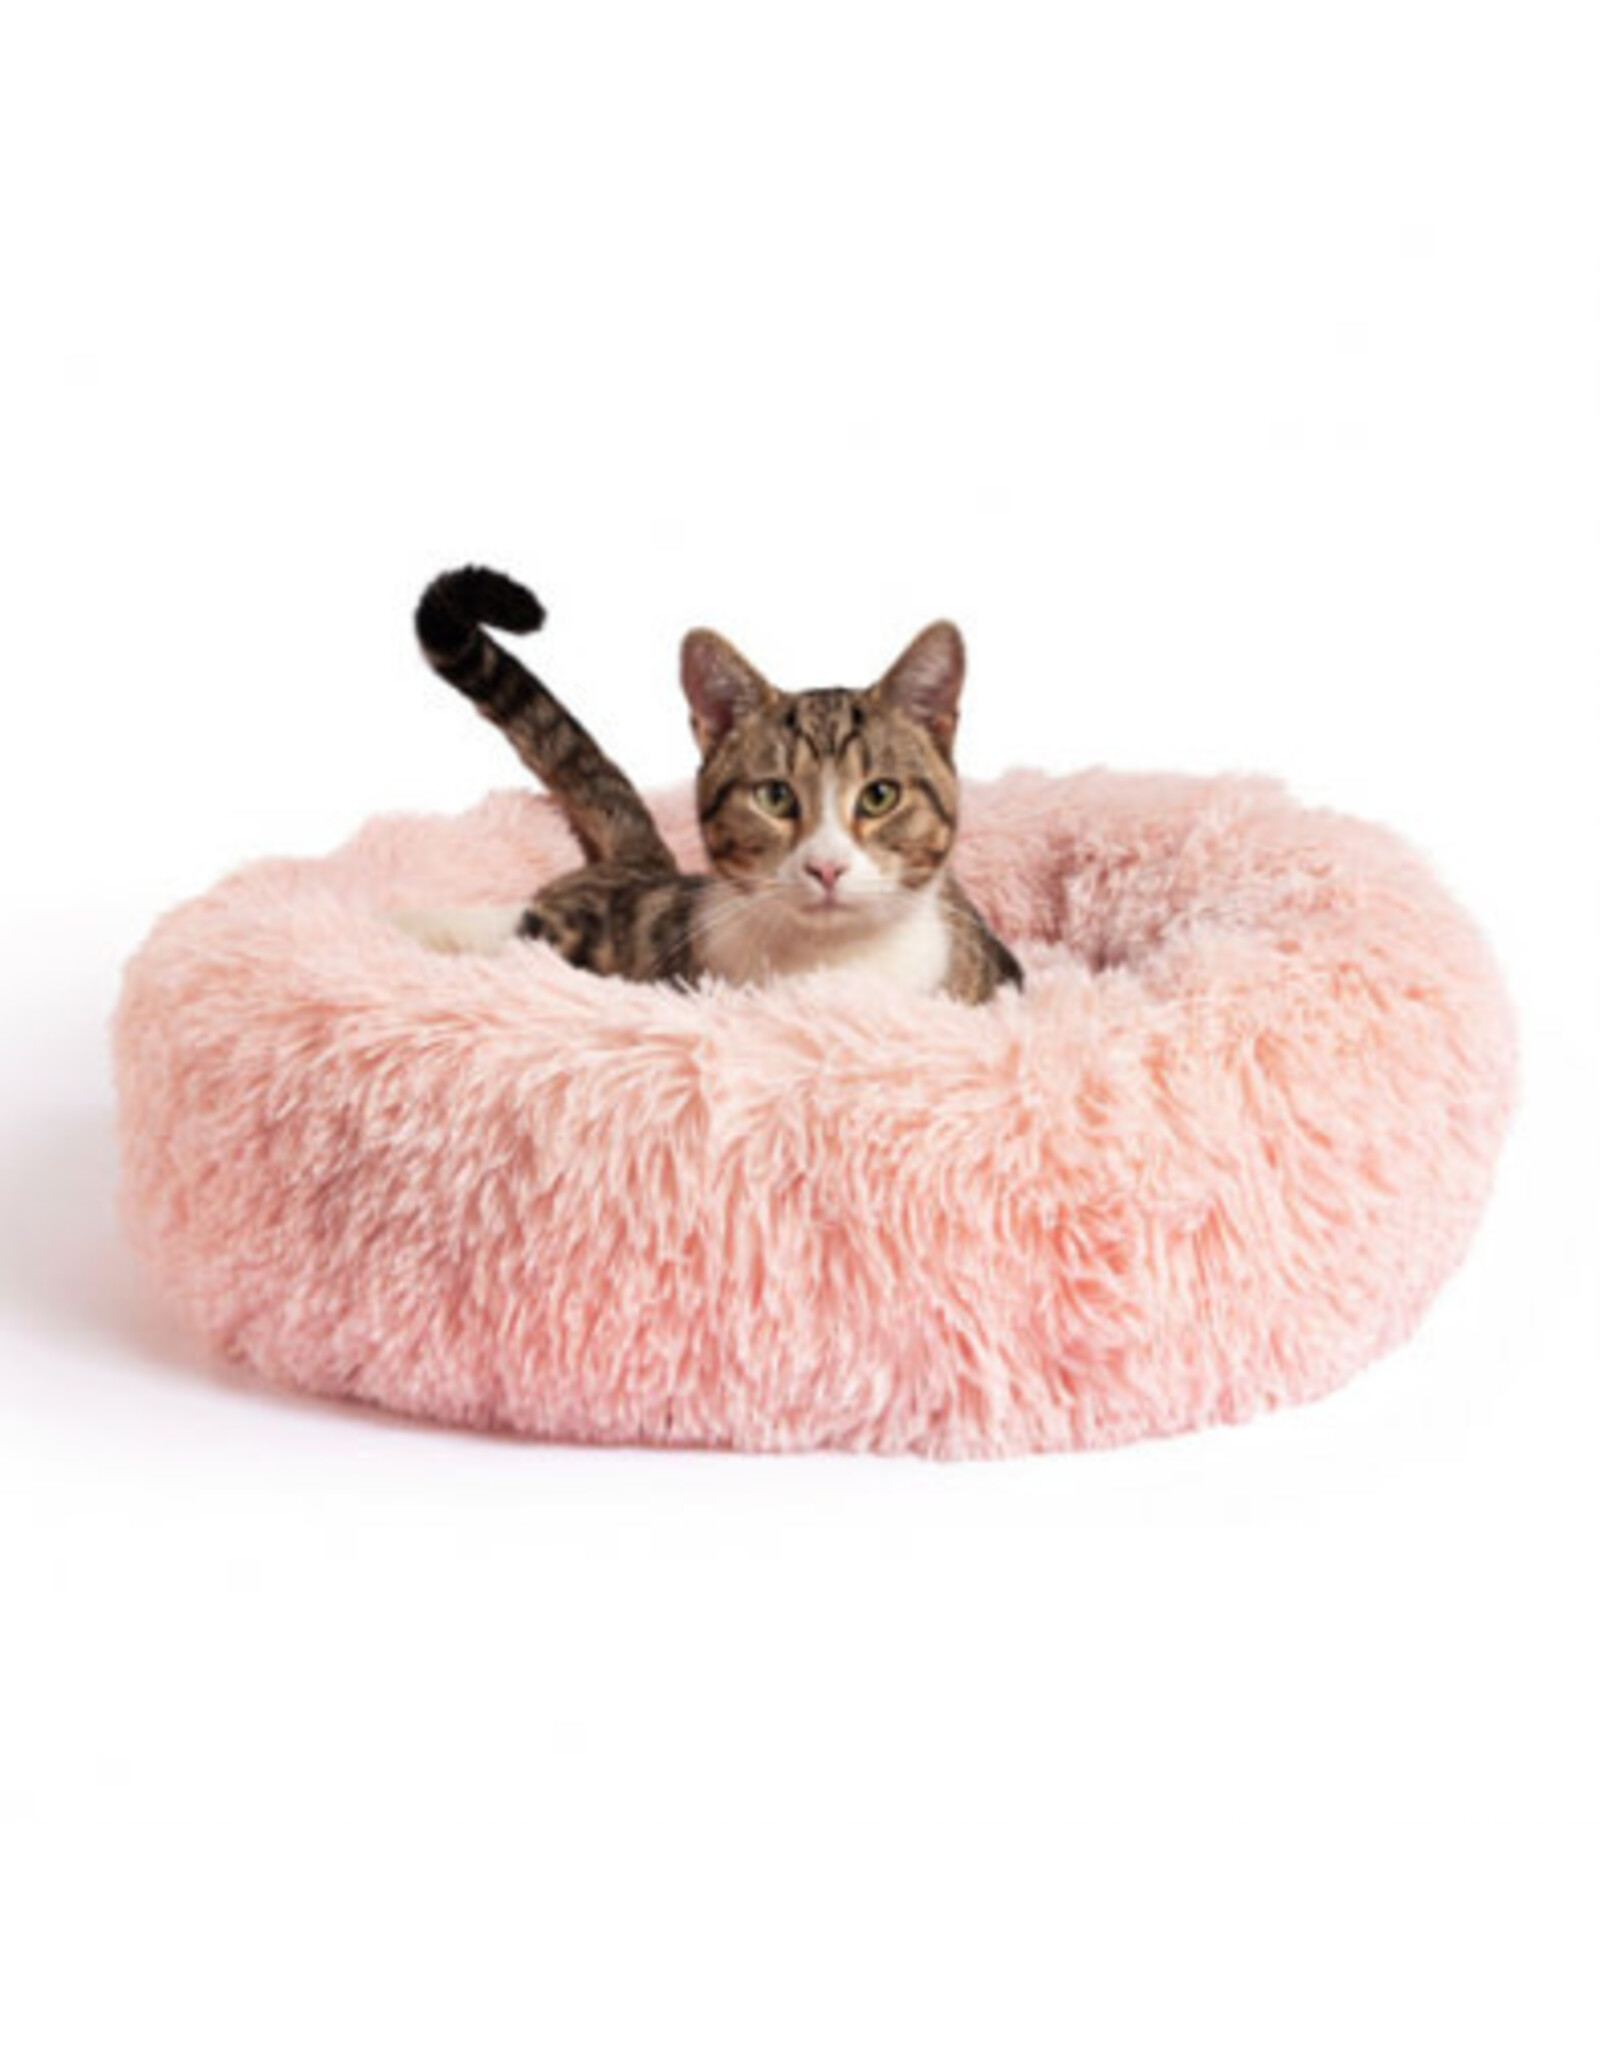 BFBS Donut bed Shag Fur cotton candy 23x23''